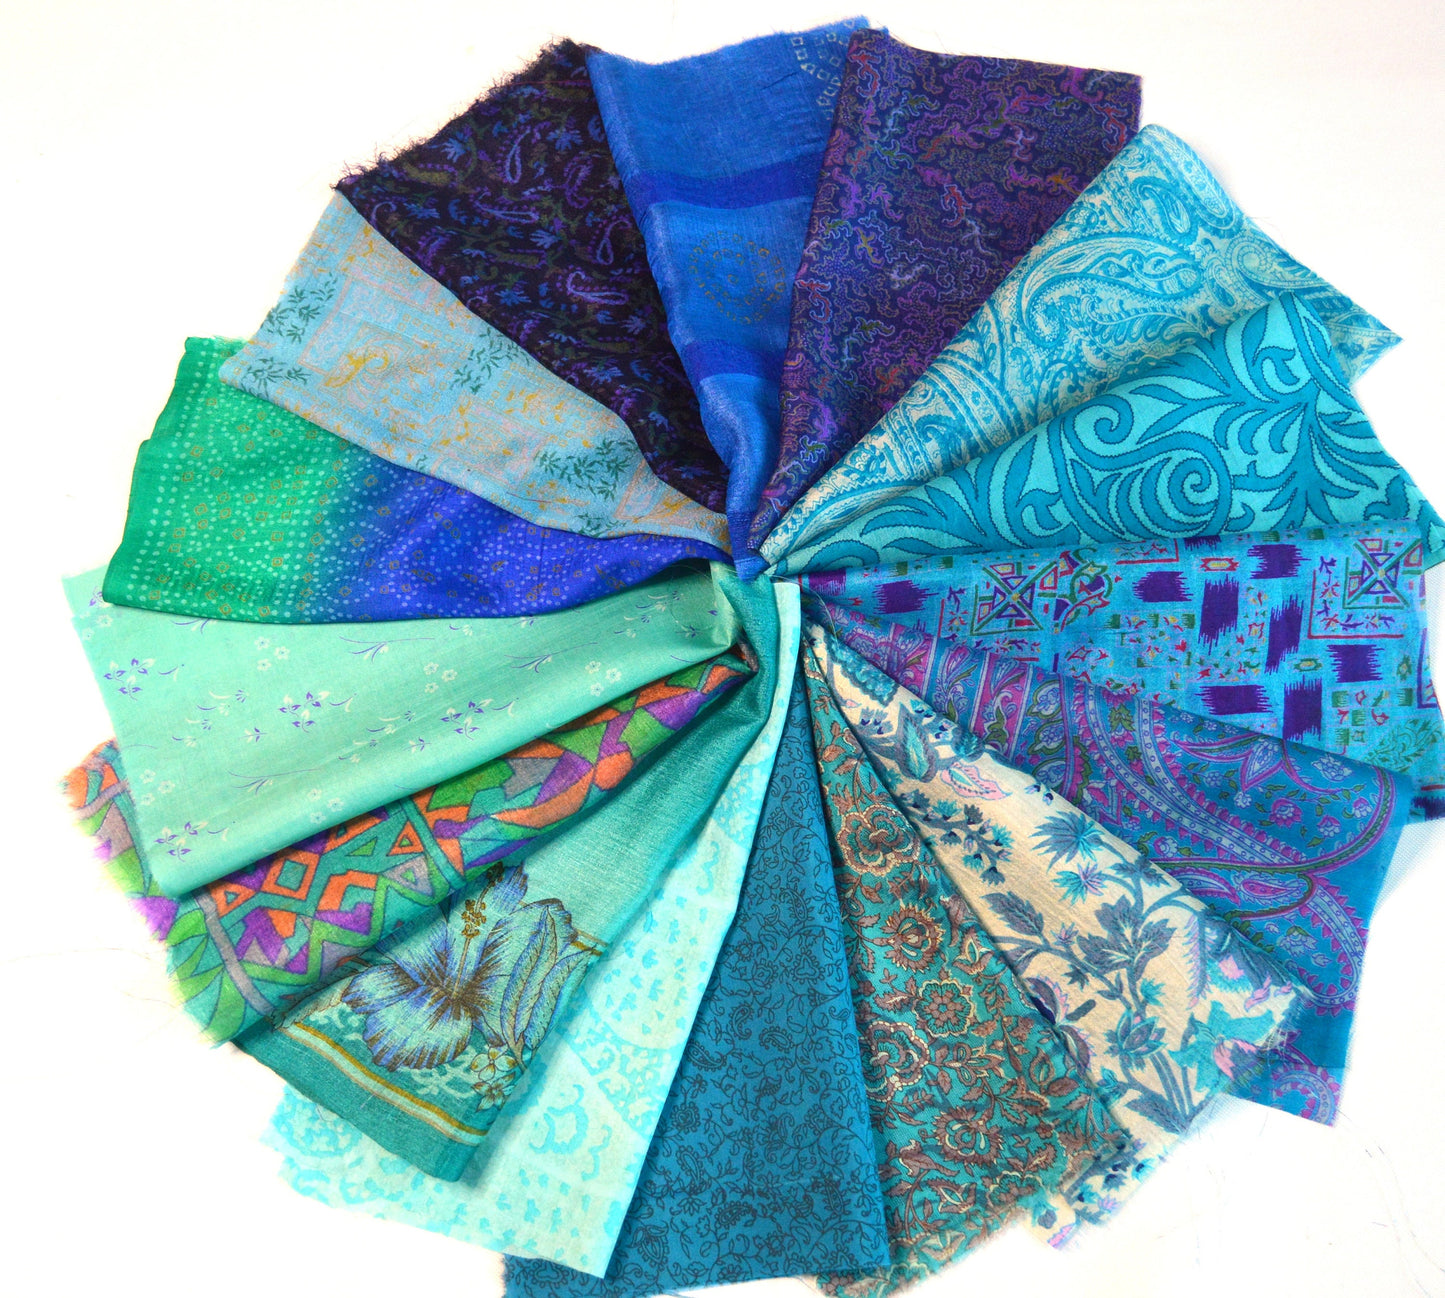 10 Inch x 16 Pieces Blue Recycled Vintage Silk Sari Scraps Craft Fabric Card Making Collage Mixed Media Textile Art Sewing Junk Journals